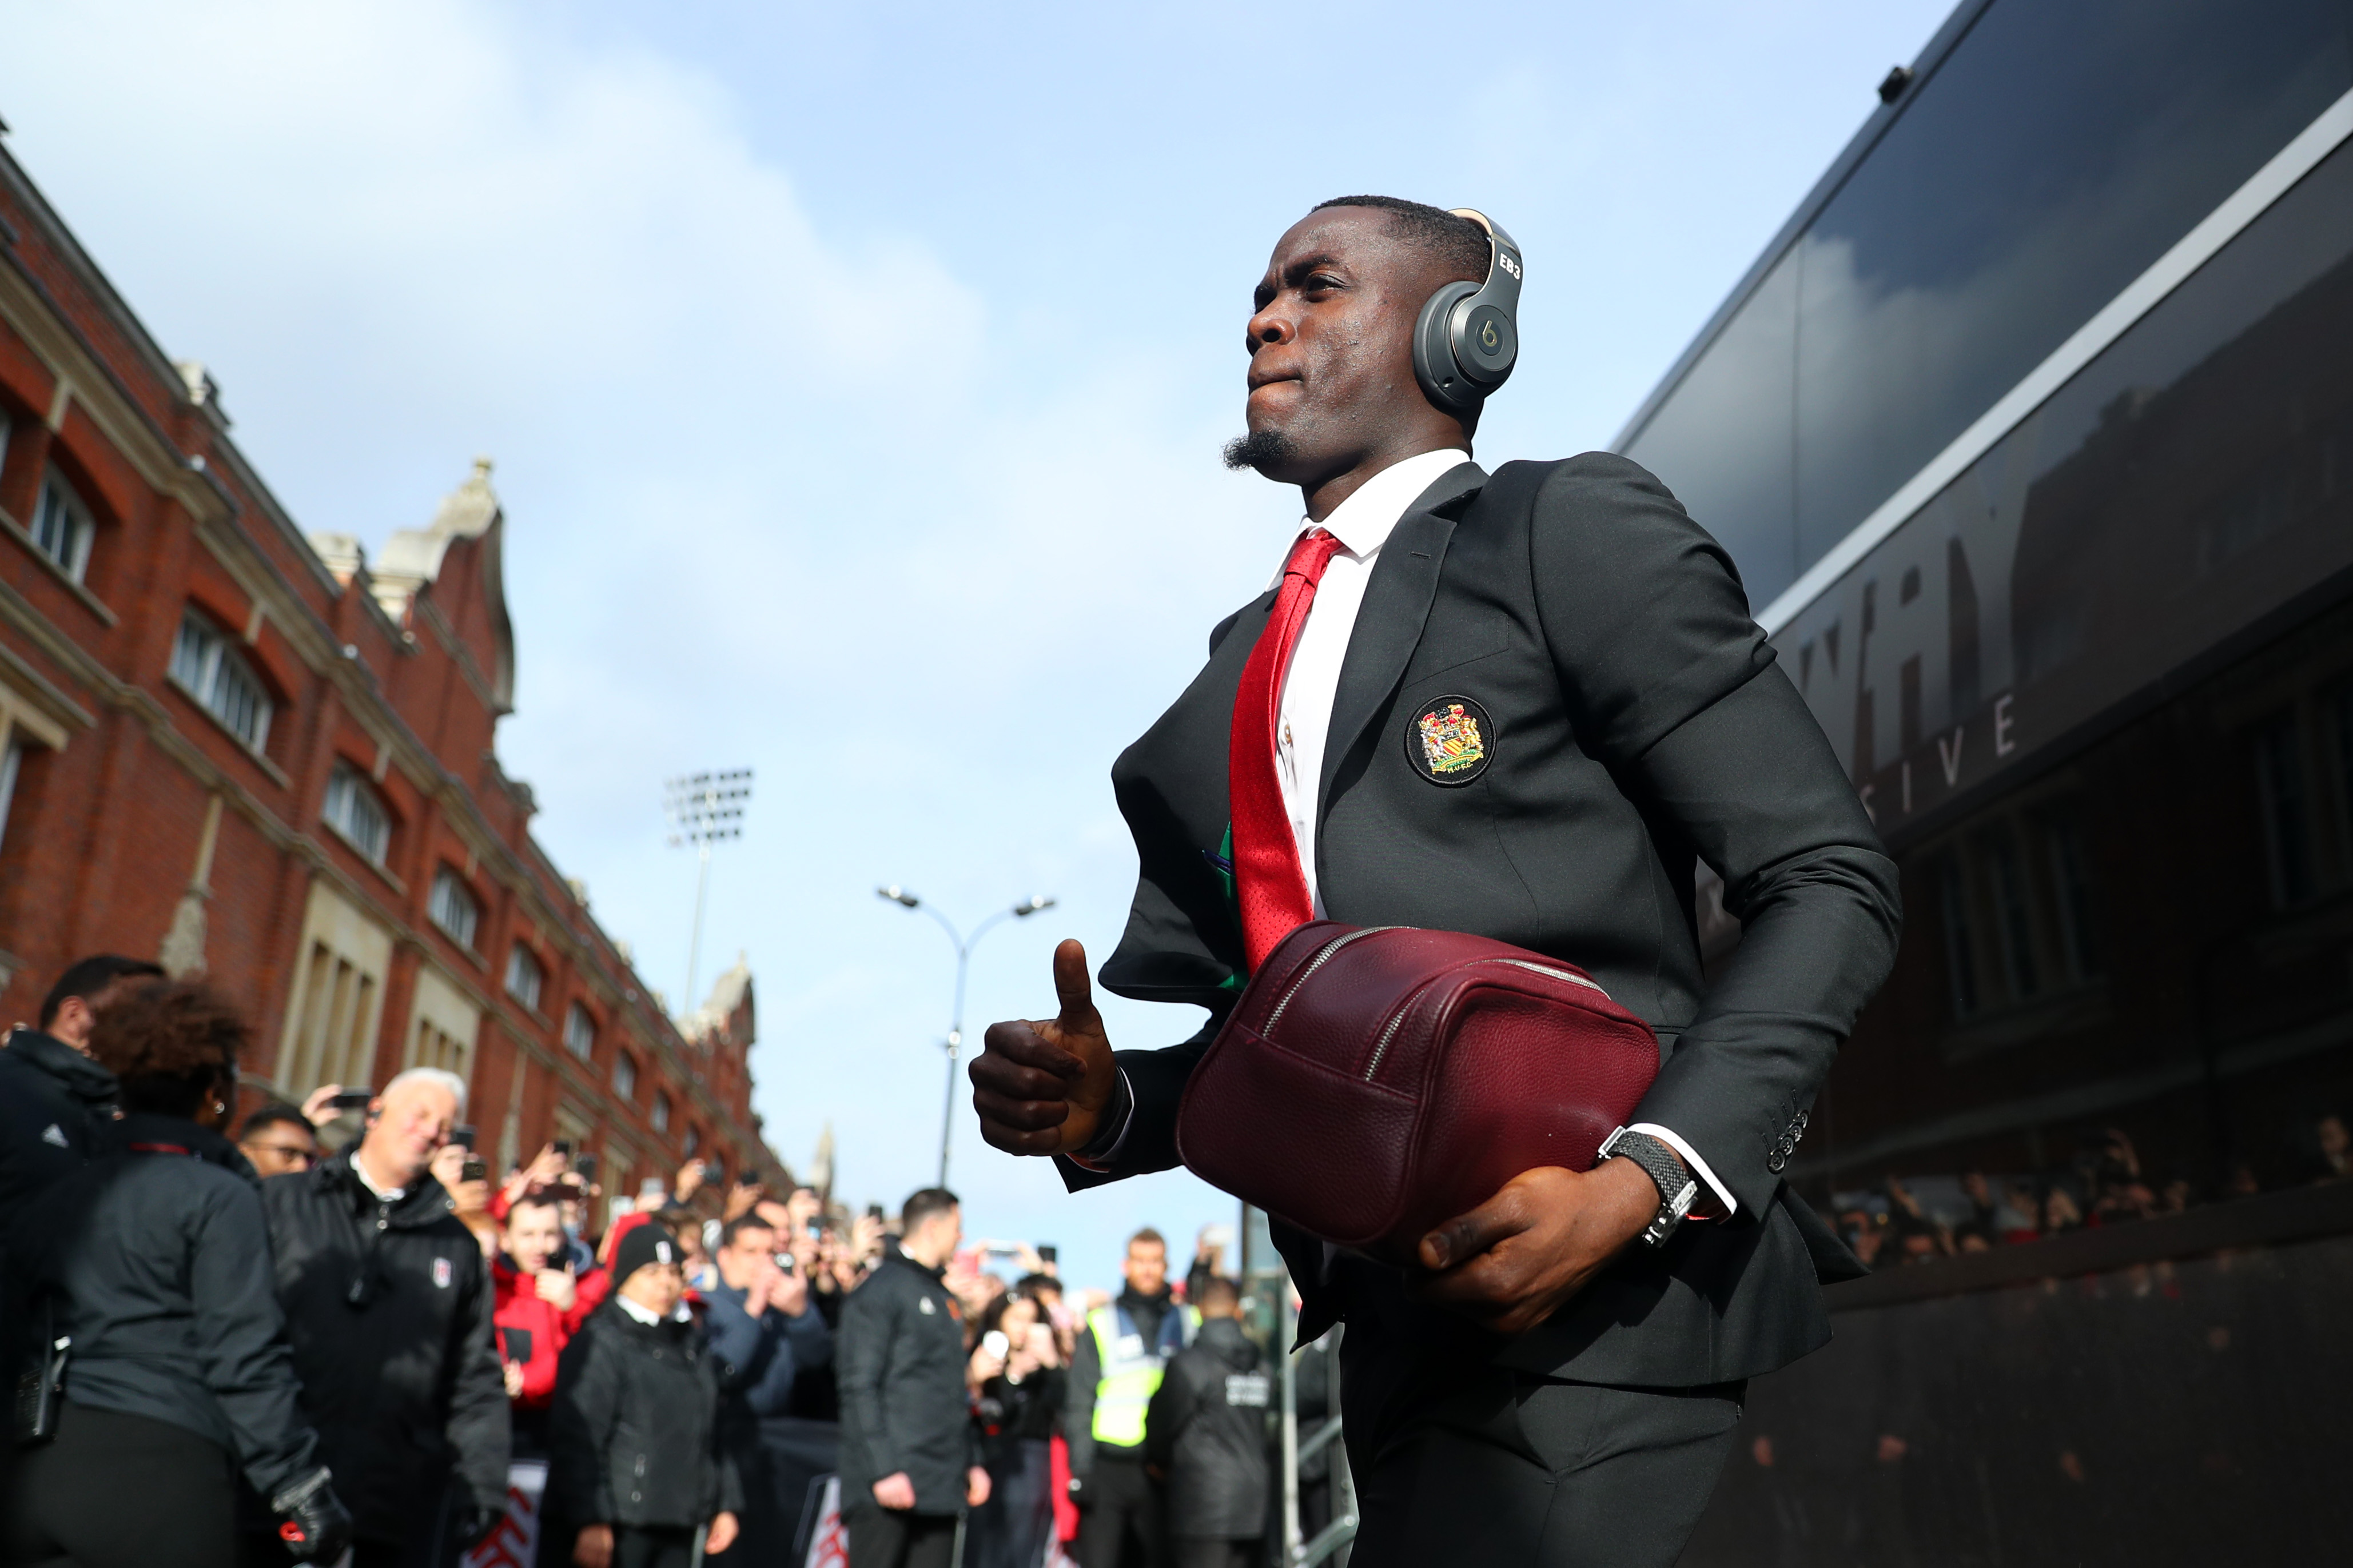 LONDON, ENGLAND - FEBRUARY 09:  Eric Bailly of Manchester United arrives at the stadium prior to the Premier League match between Fulham FC and Manchester United at Craven Cottage on February 9, 2019 in London, United Kingdom.  (Photo by Catherine Ivill/Getty Images)